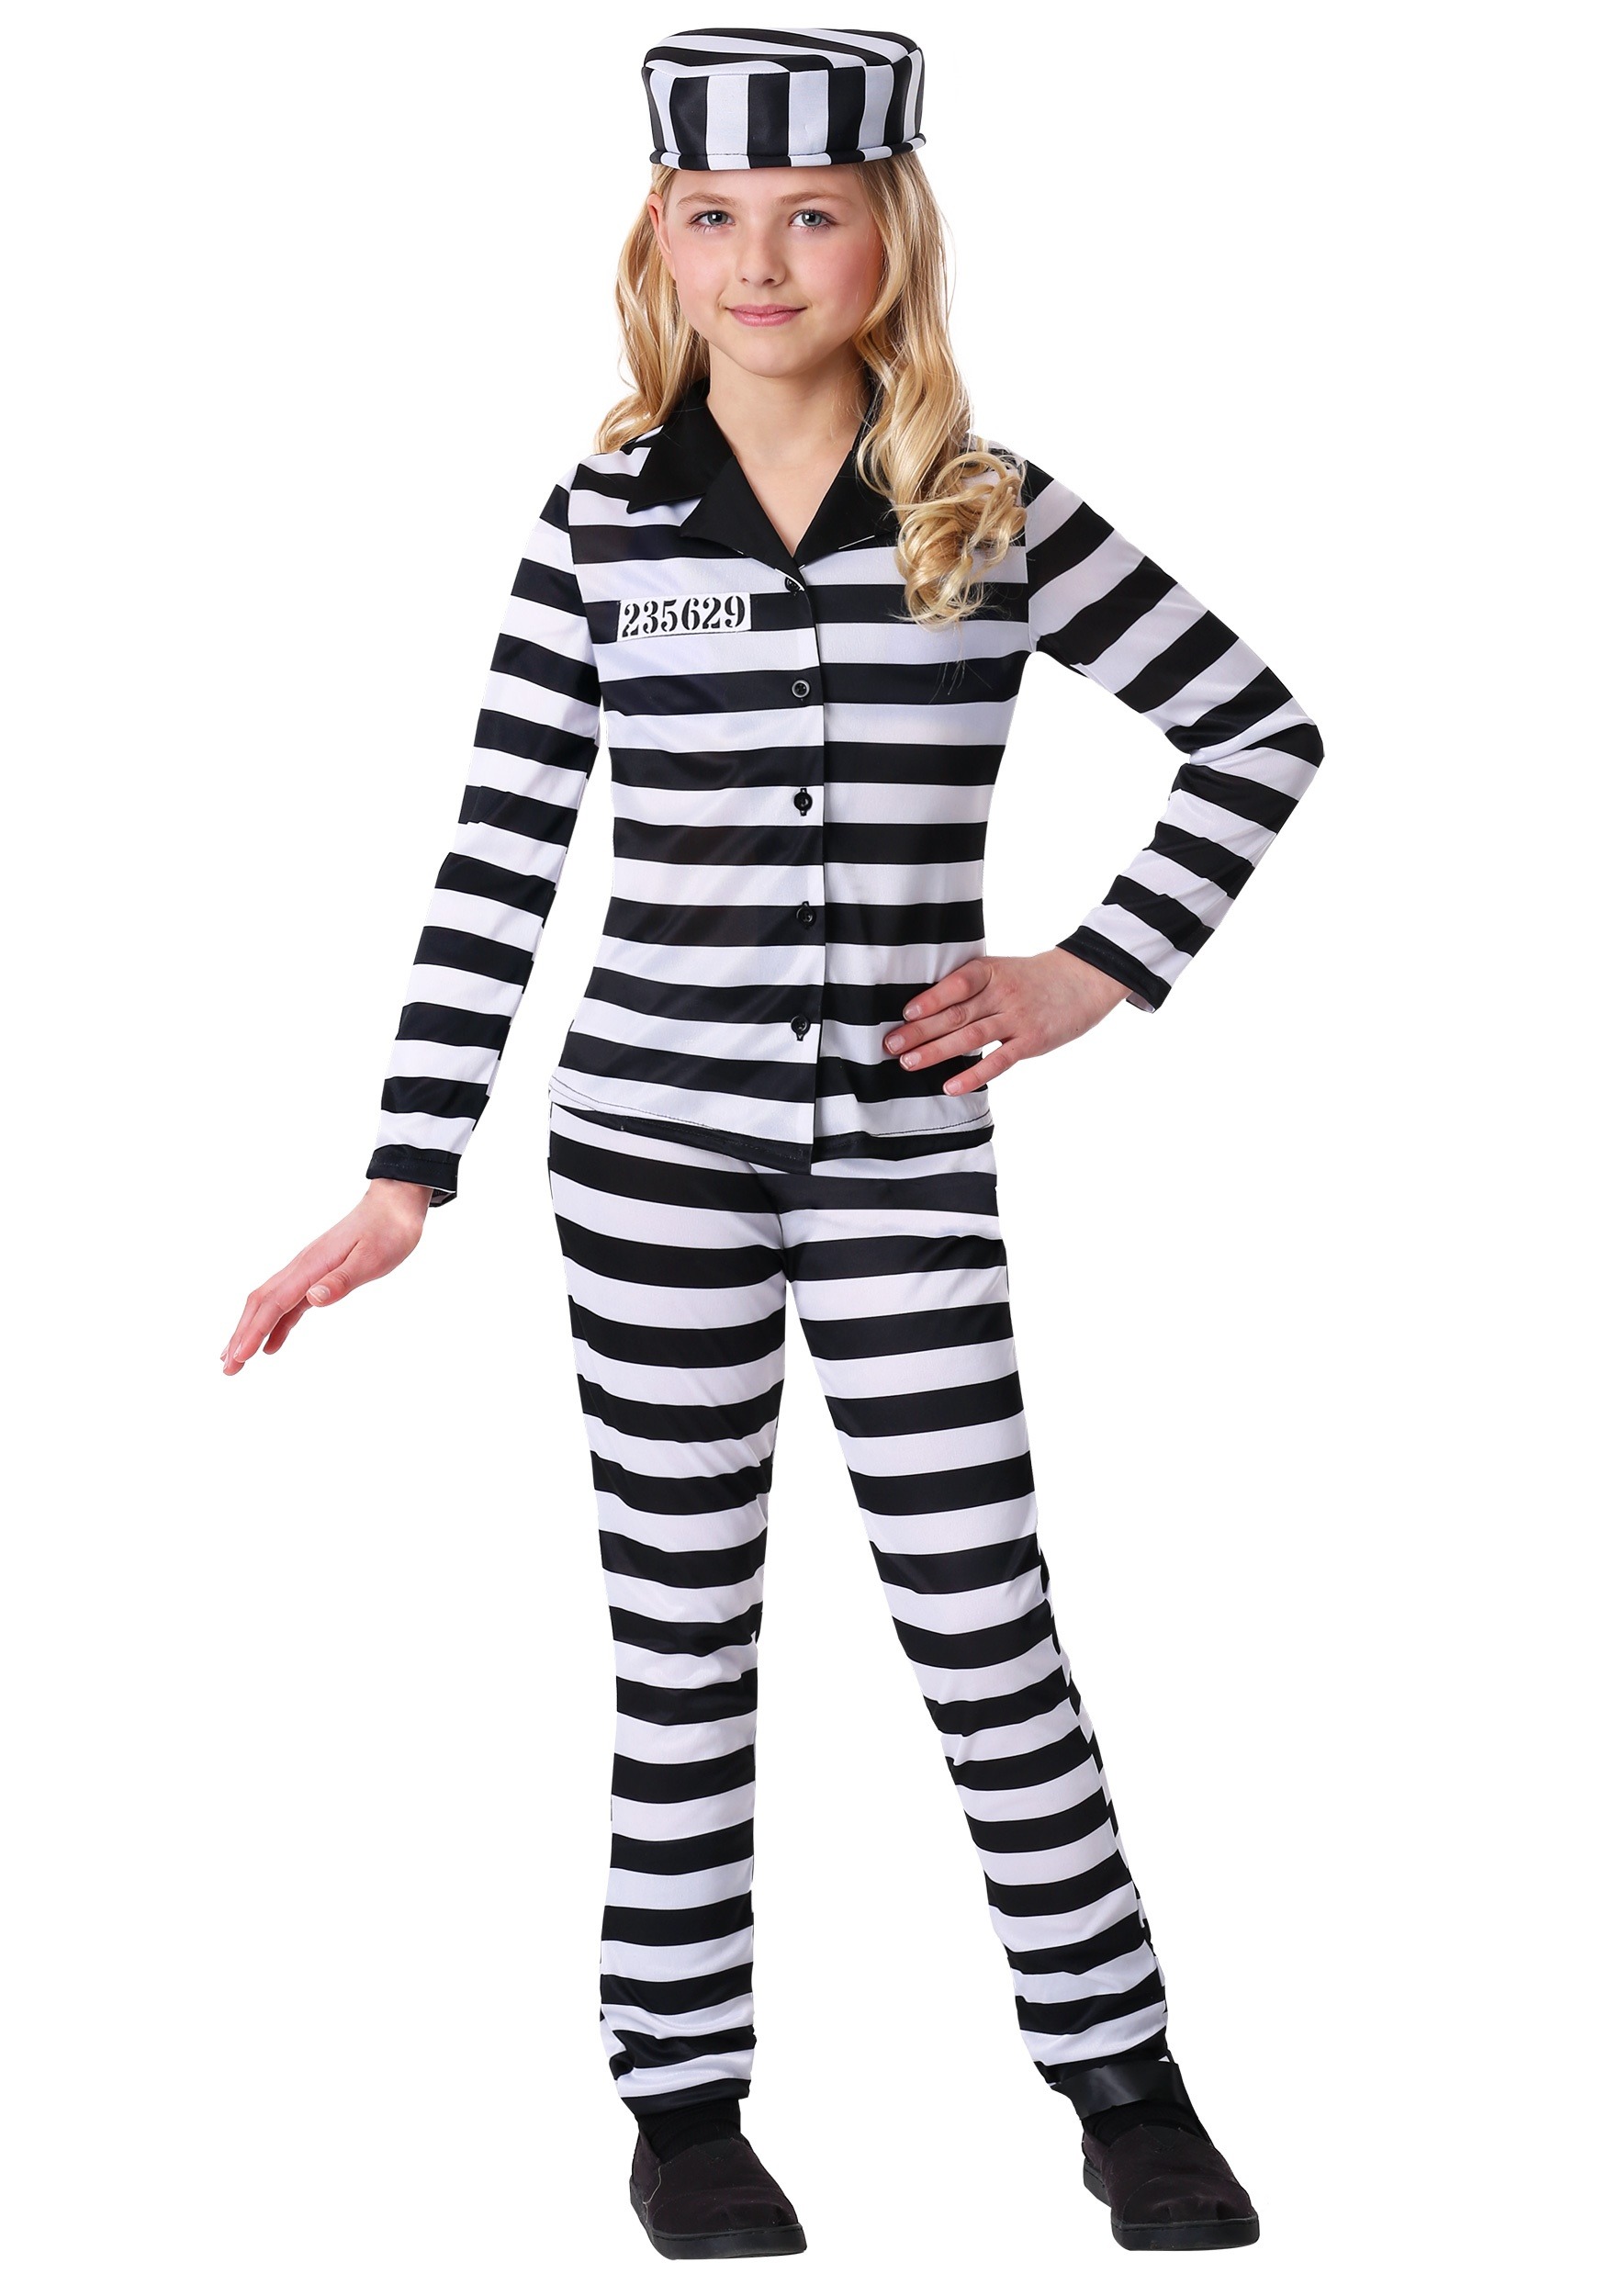 Photos - Fancy Dress FUN Costumes Incarcerated Cutie Costume for Girls Black/White